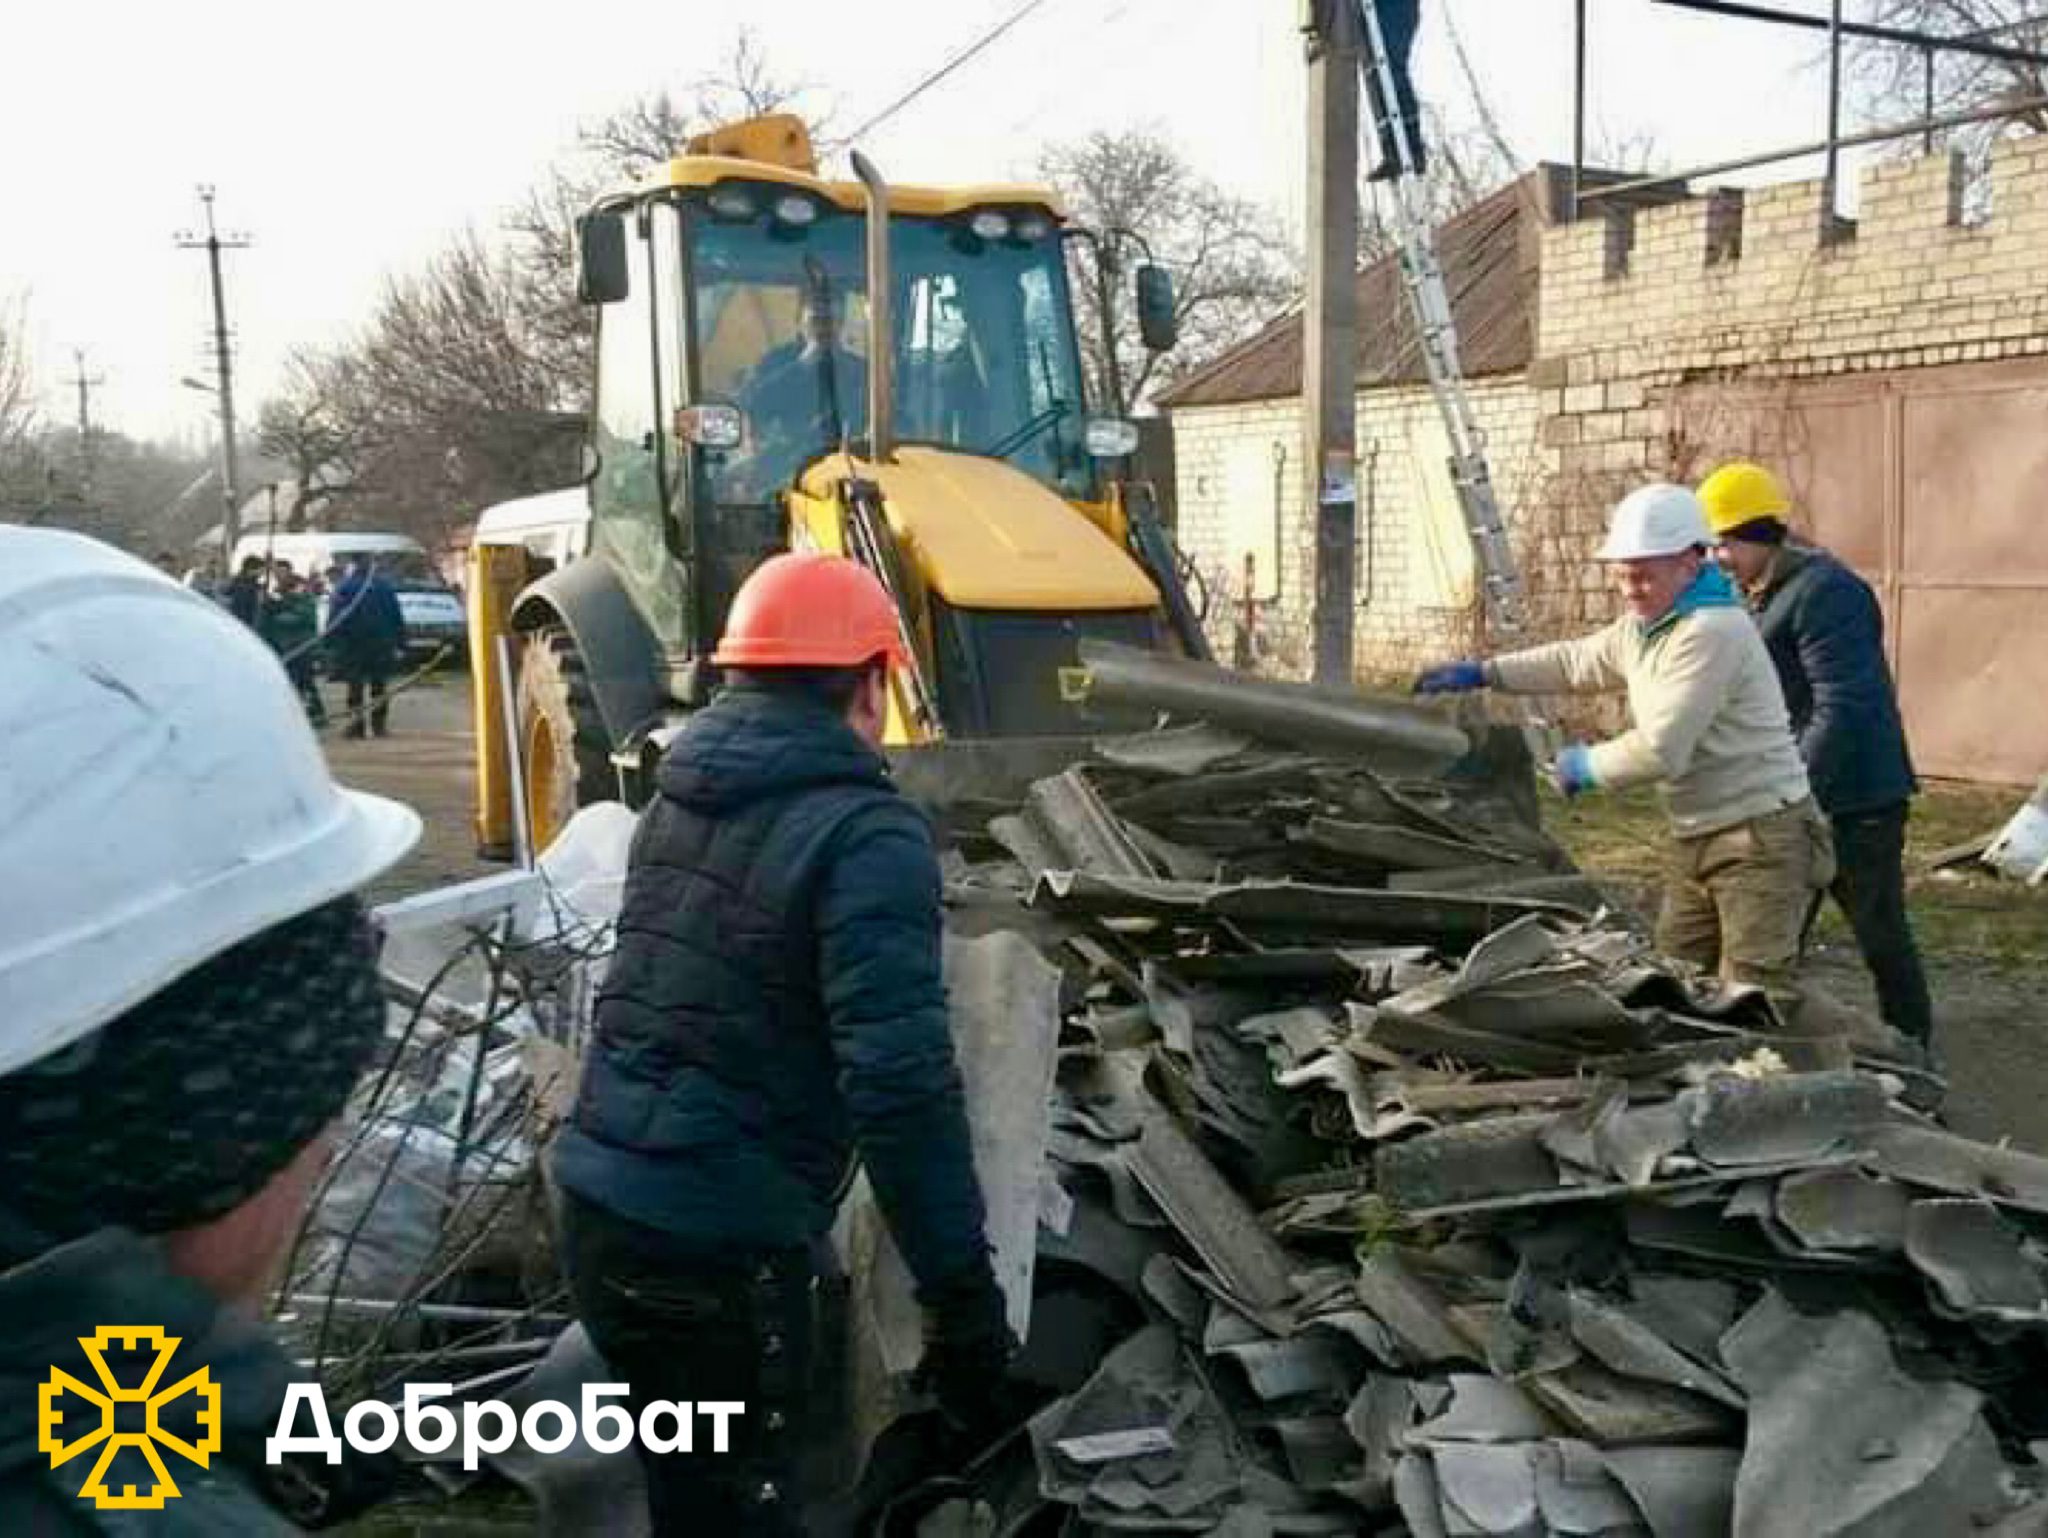 We start the new year, as it should be, with rebuilding the country and helping Ukrainians.